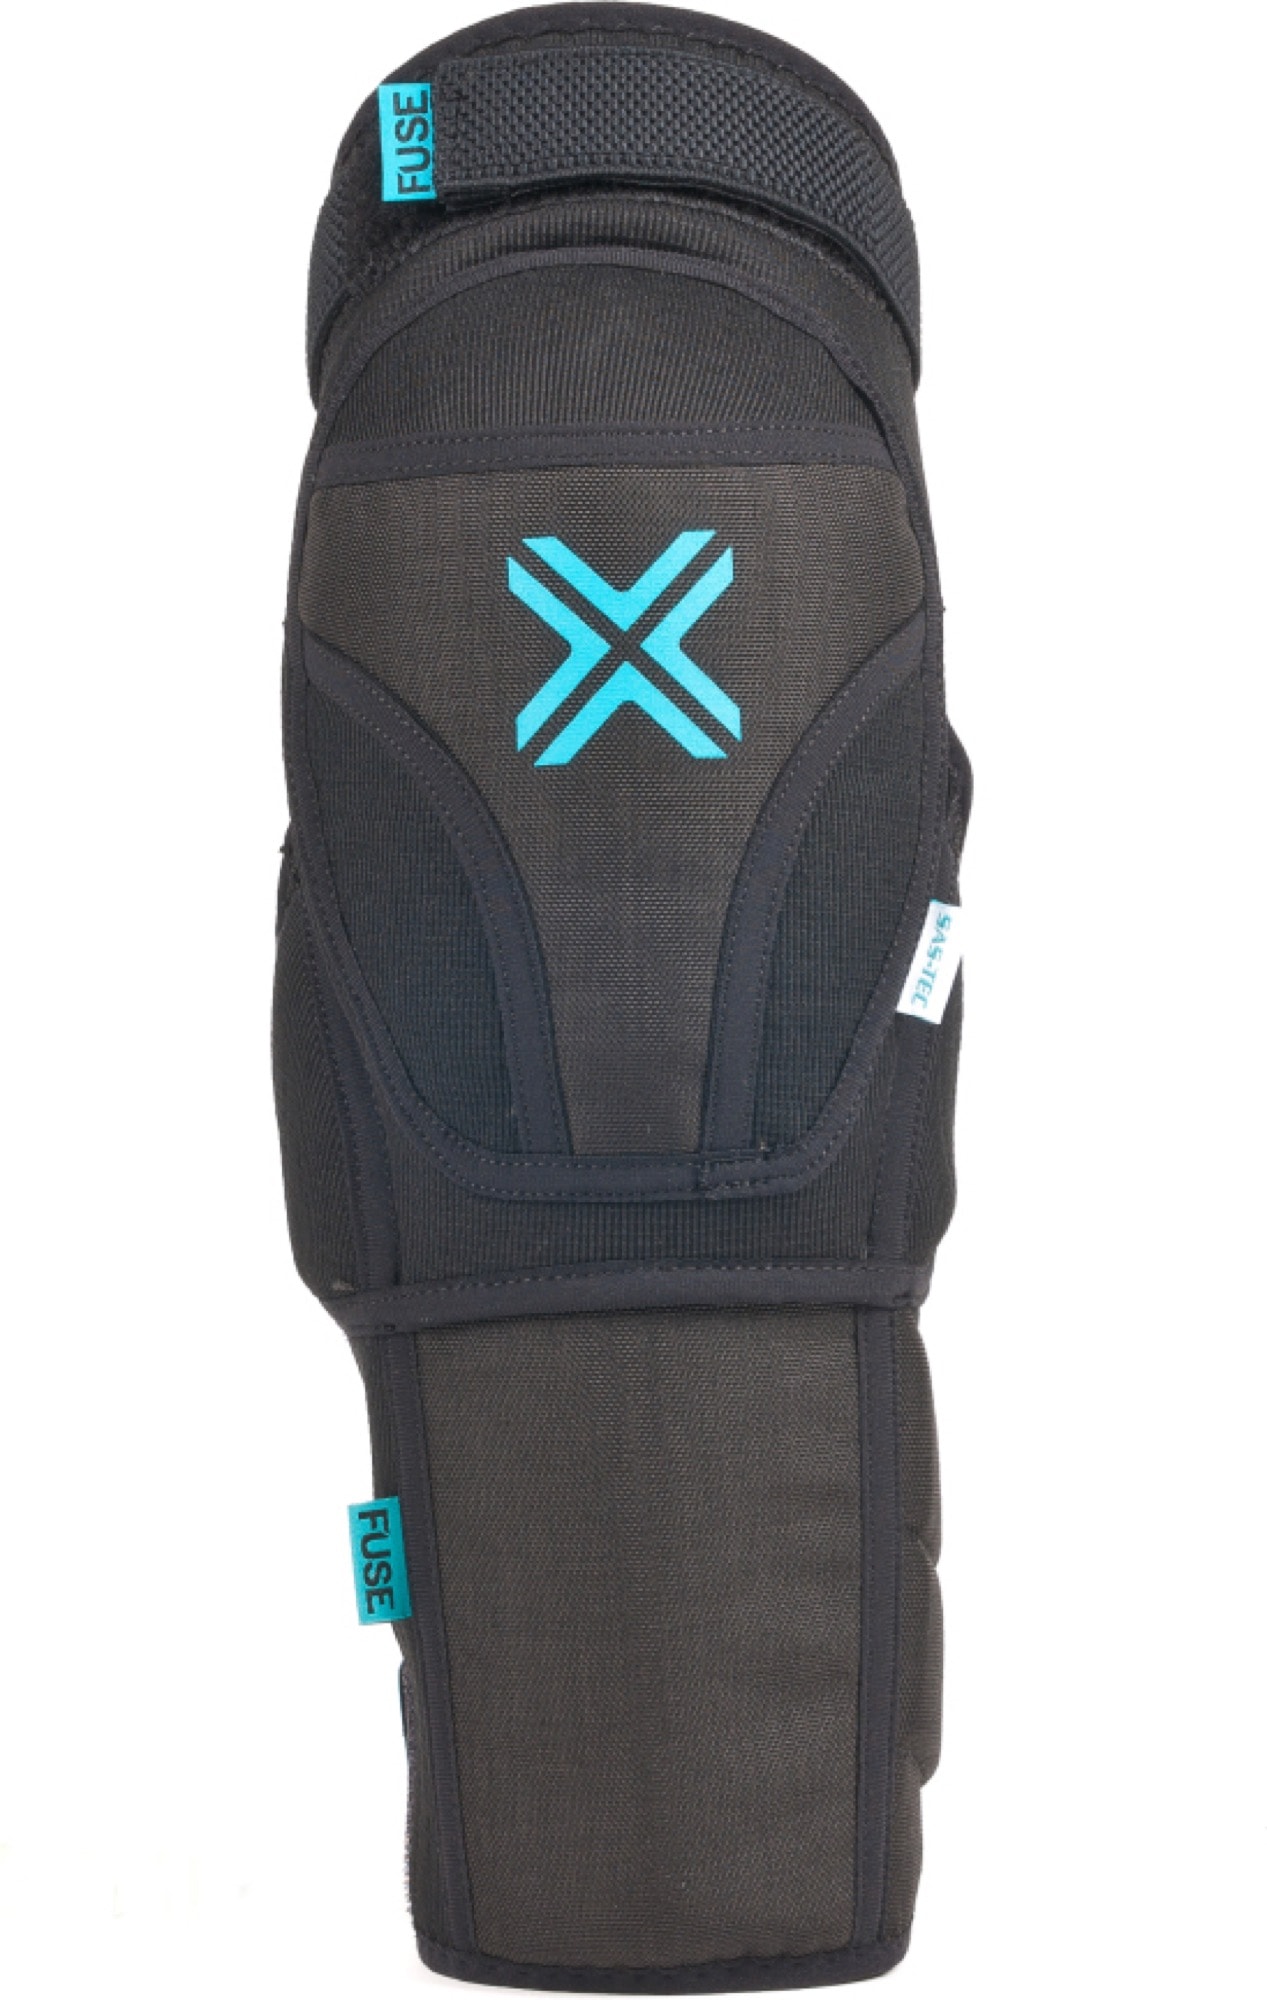 FUSE Protection Echo  Knee and Shin Guards Black • Your Online